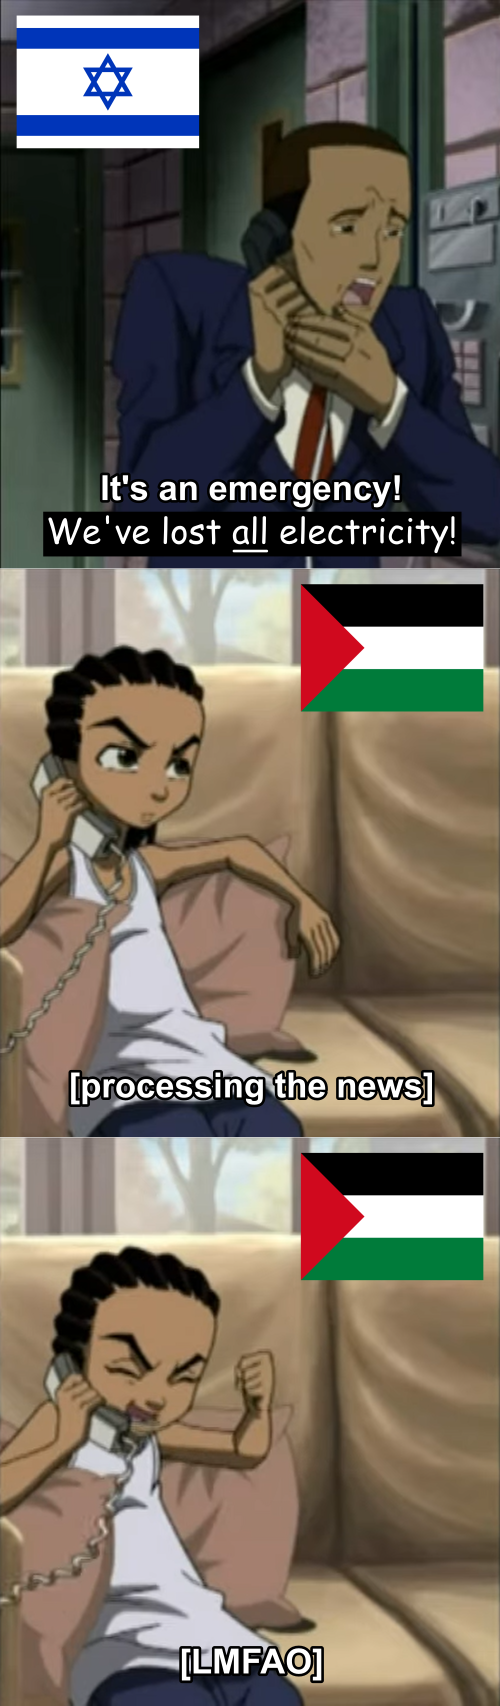 Cropped screencaps from The Boondocks season 1 episode 3: frame one depicts Tom DuBois in holding, crying, and saying on the phone, "It's an emergency! We've lost all electricity!". There is an Israeli flag in the upper left corner. The words "We've lost all electricity!" are written in comic sans against a black background to imply that this is not the original quote. The word "all" is underlined to emphasize it. Frame two depicts Riley Freeman in his home on the couch, on the phone with DuBois. There is a Palestinian flag in the upper right corner. Riley has a contemplative expression, and the caption reads, "Processing the news", between brackets. Frame three continues from the previous, Riley now bursting into laughter, with the caption "LMFAO", between brackets.